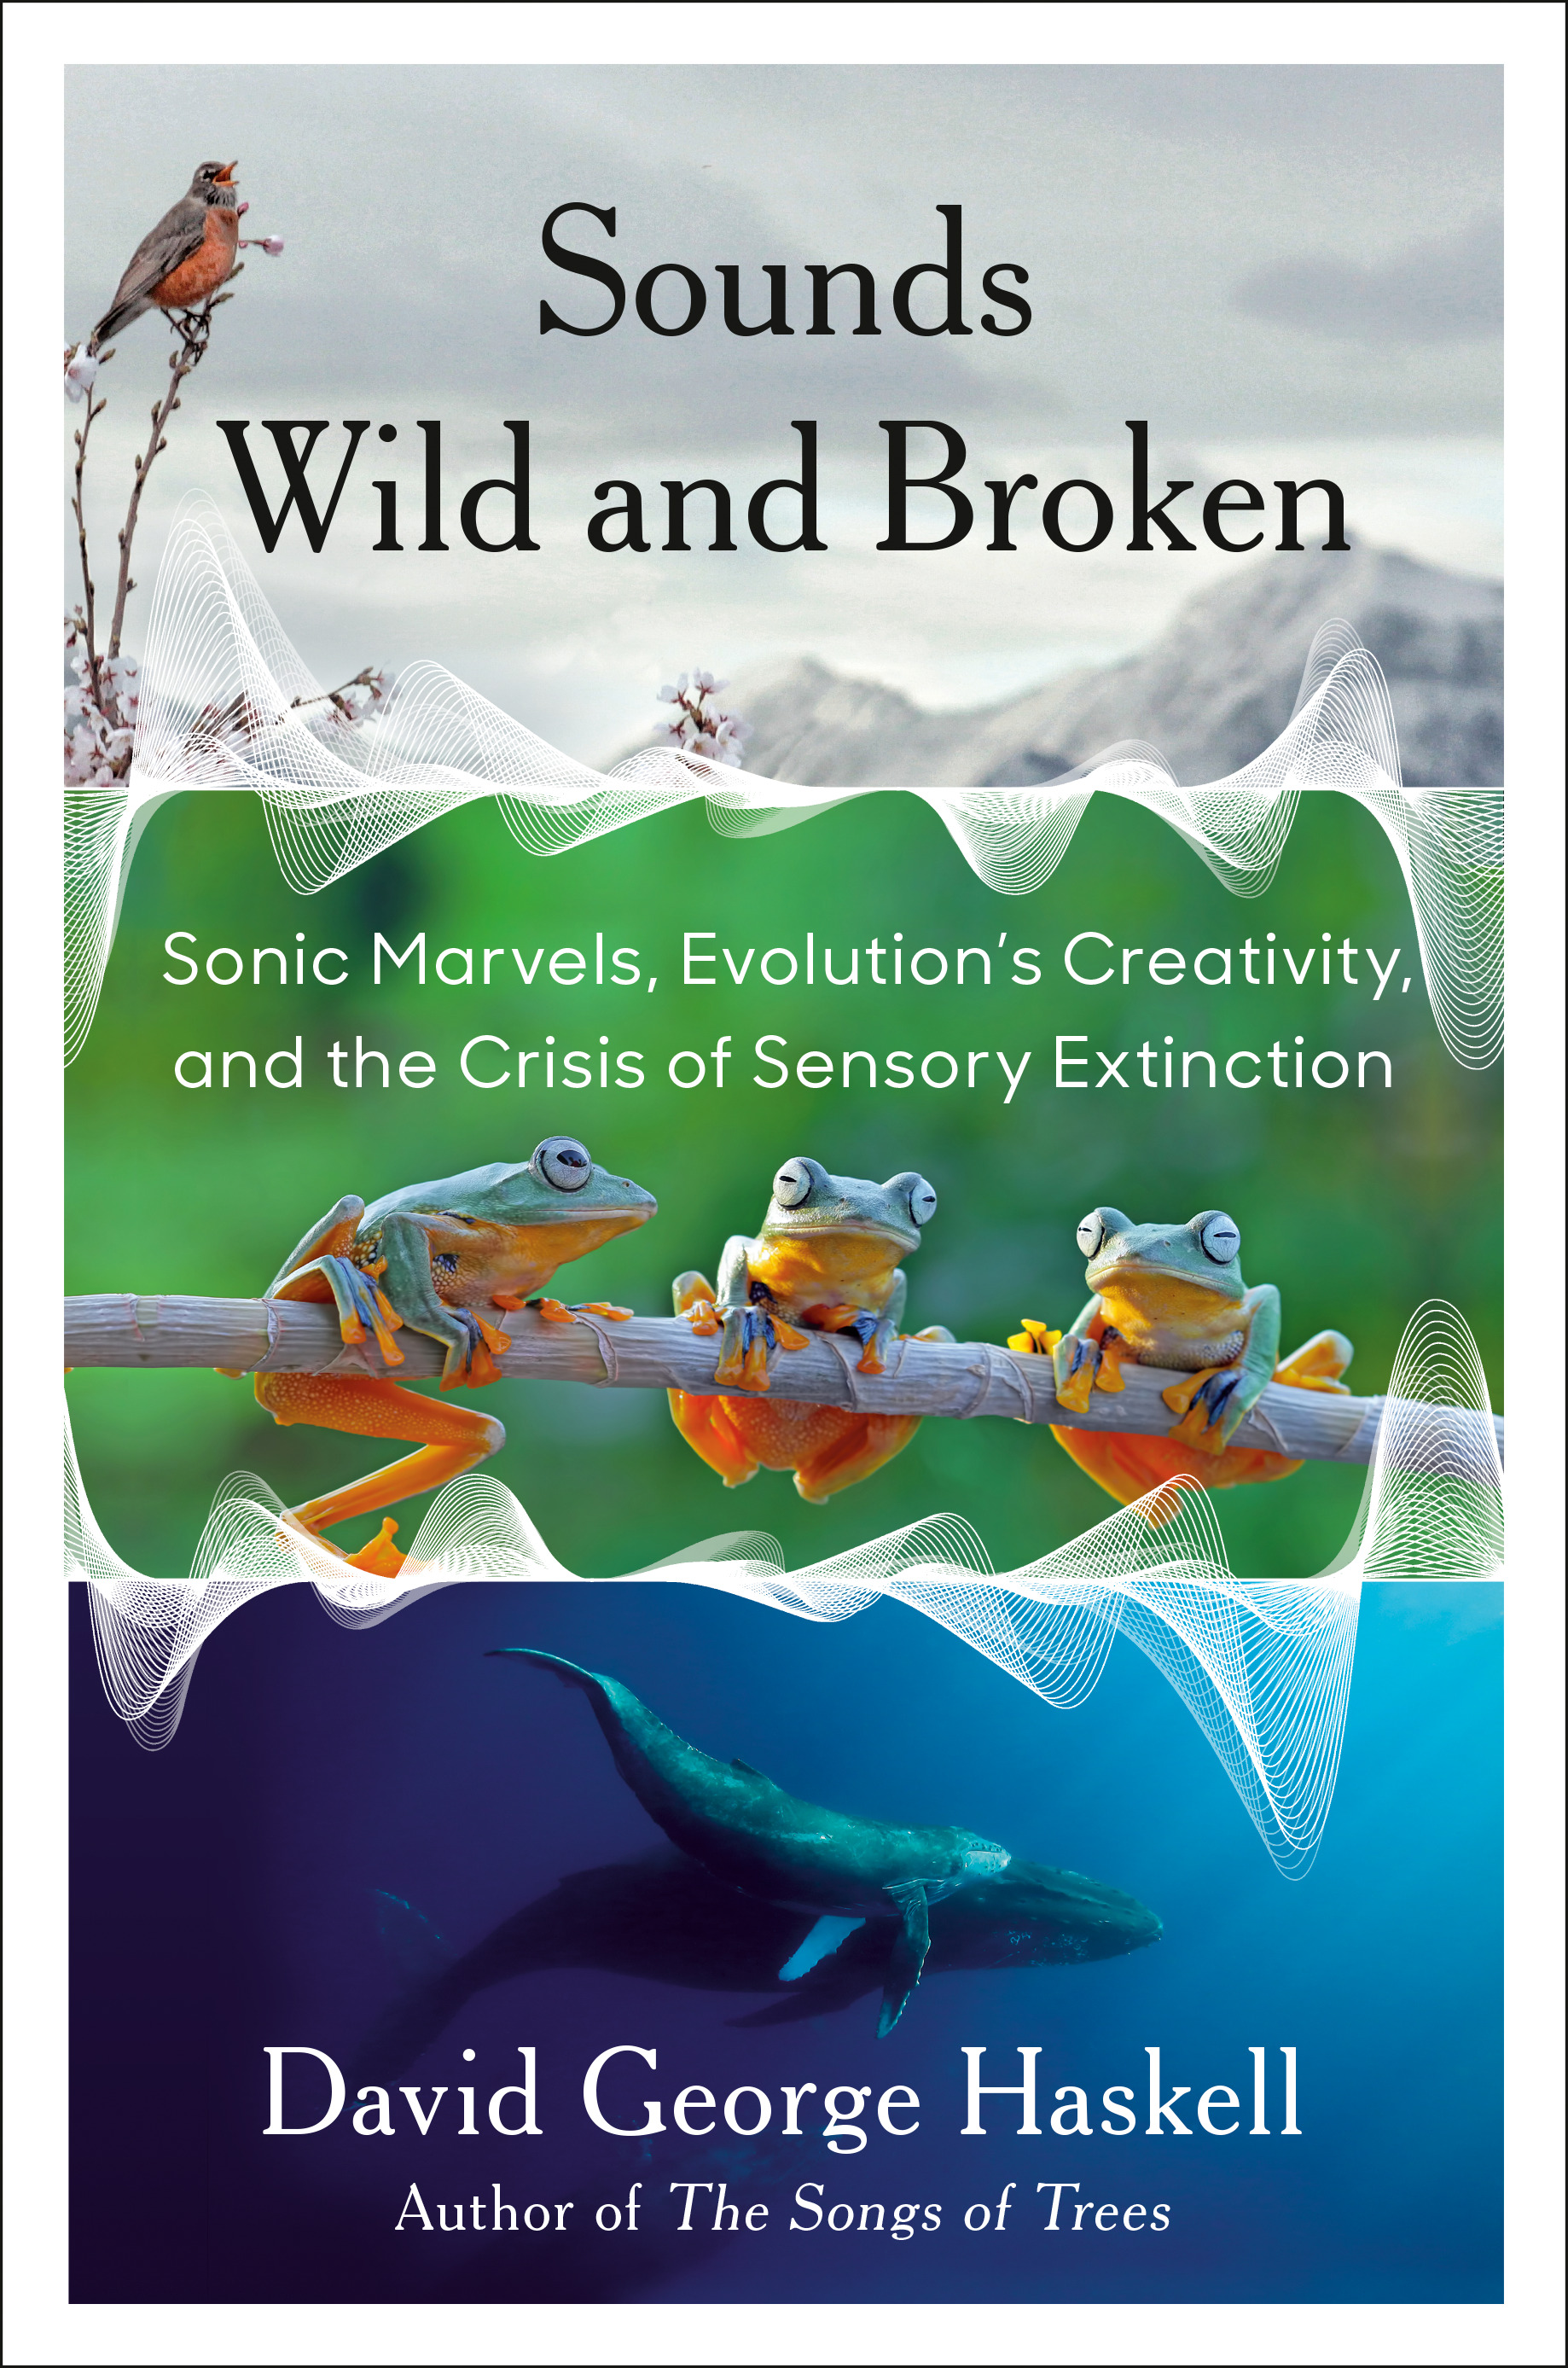 Sounds Wild and Broken : Sonic Marvels, Evolution's Creativity, and the Crisis of Sensory Extinction | Nature